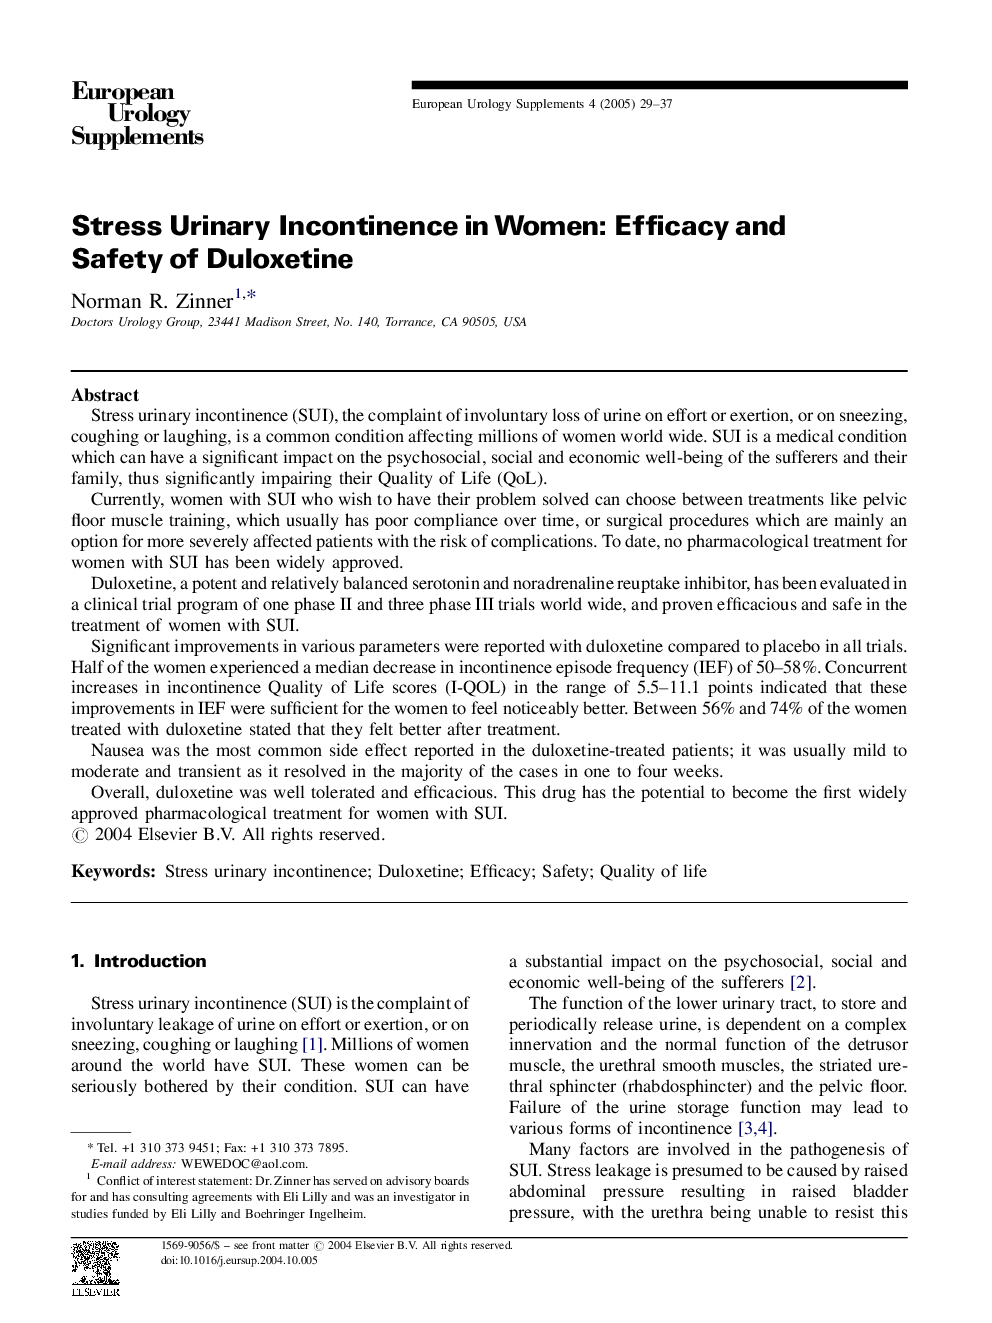 Stress Urinary Incontinence in Women: Efficacy and Safety of Duloxetine